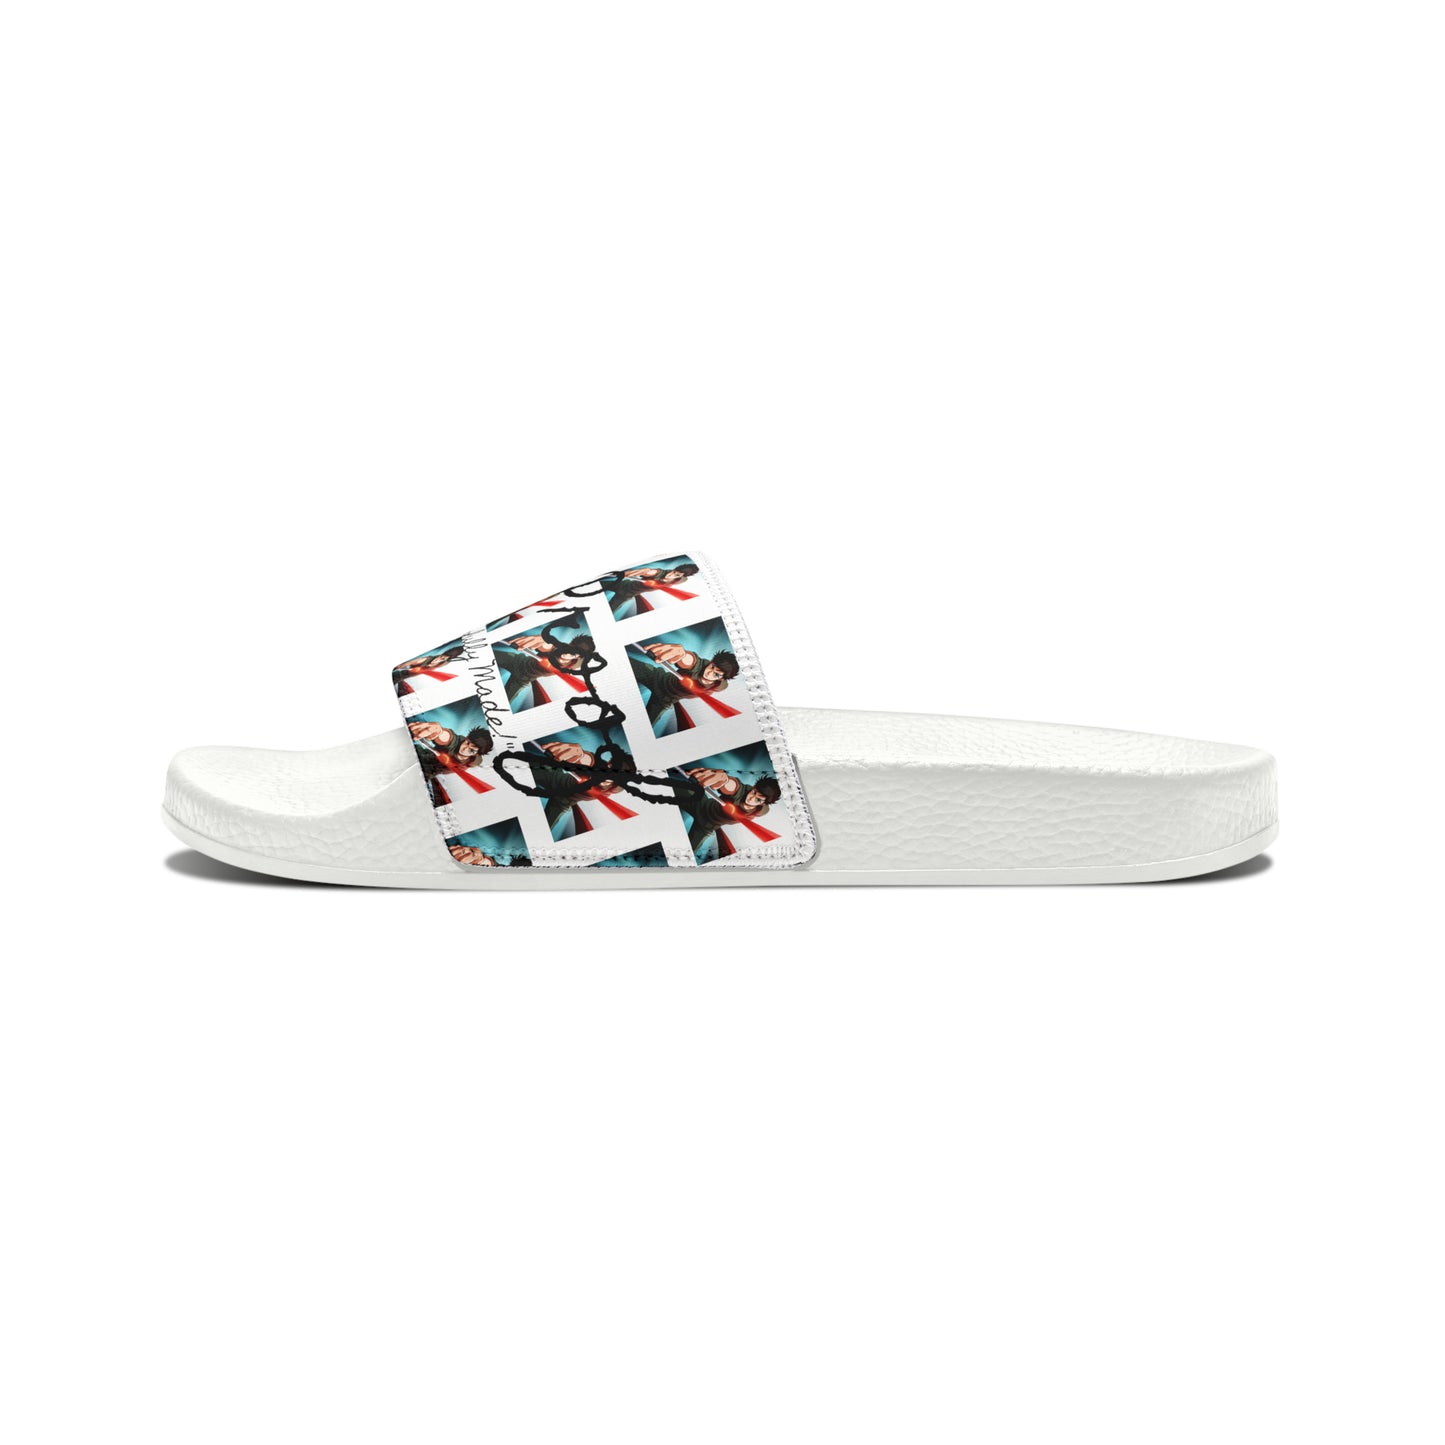 Bulyy-Proof Anime By Micah Youth PU Slide Sandals